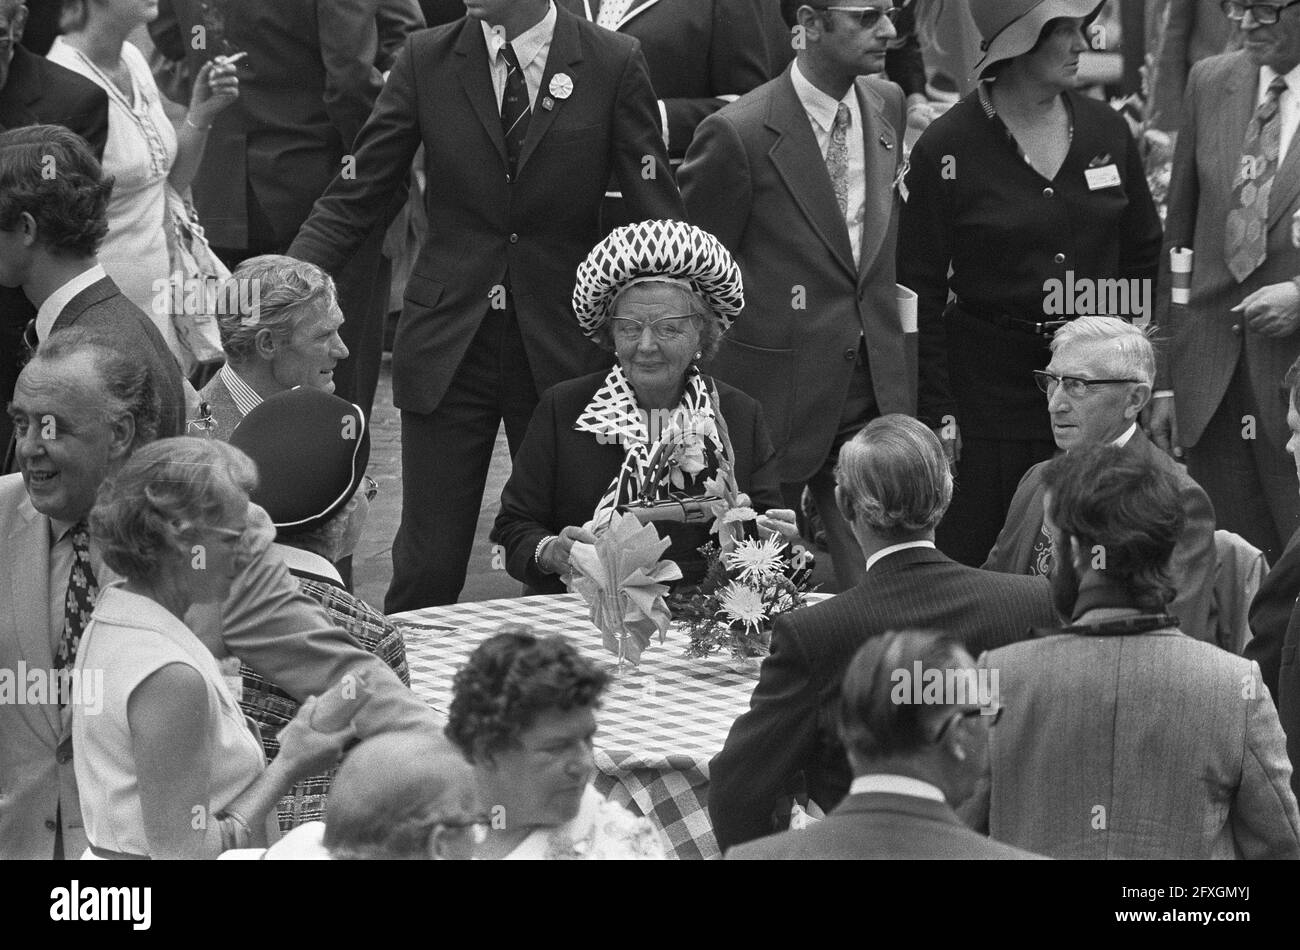 Celebration of Queen Juliana's Silver Jubilee in The Hague, Her Majesty during coffee meal, drinks, September 6, 1973, Celebrations, anniversaries, queens, The Netherlands, 20th century press agency photo, news to remember, documentary, historic photography 1945-1990, visual stories, human history of the Twentieth Century, capturing moments in time Stock Photo